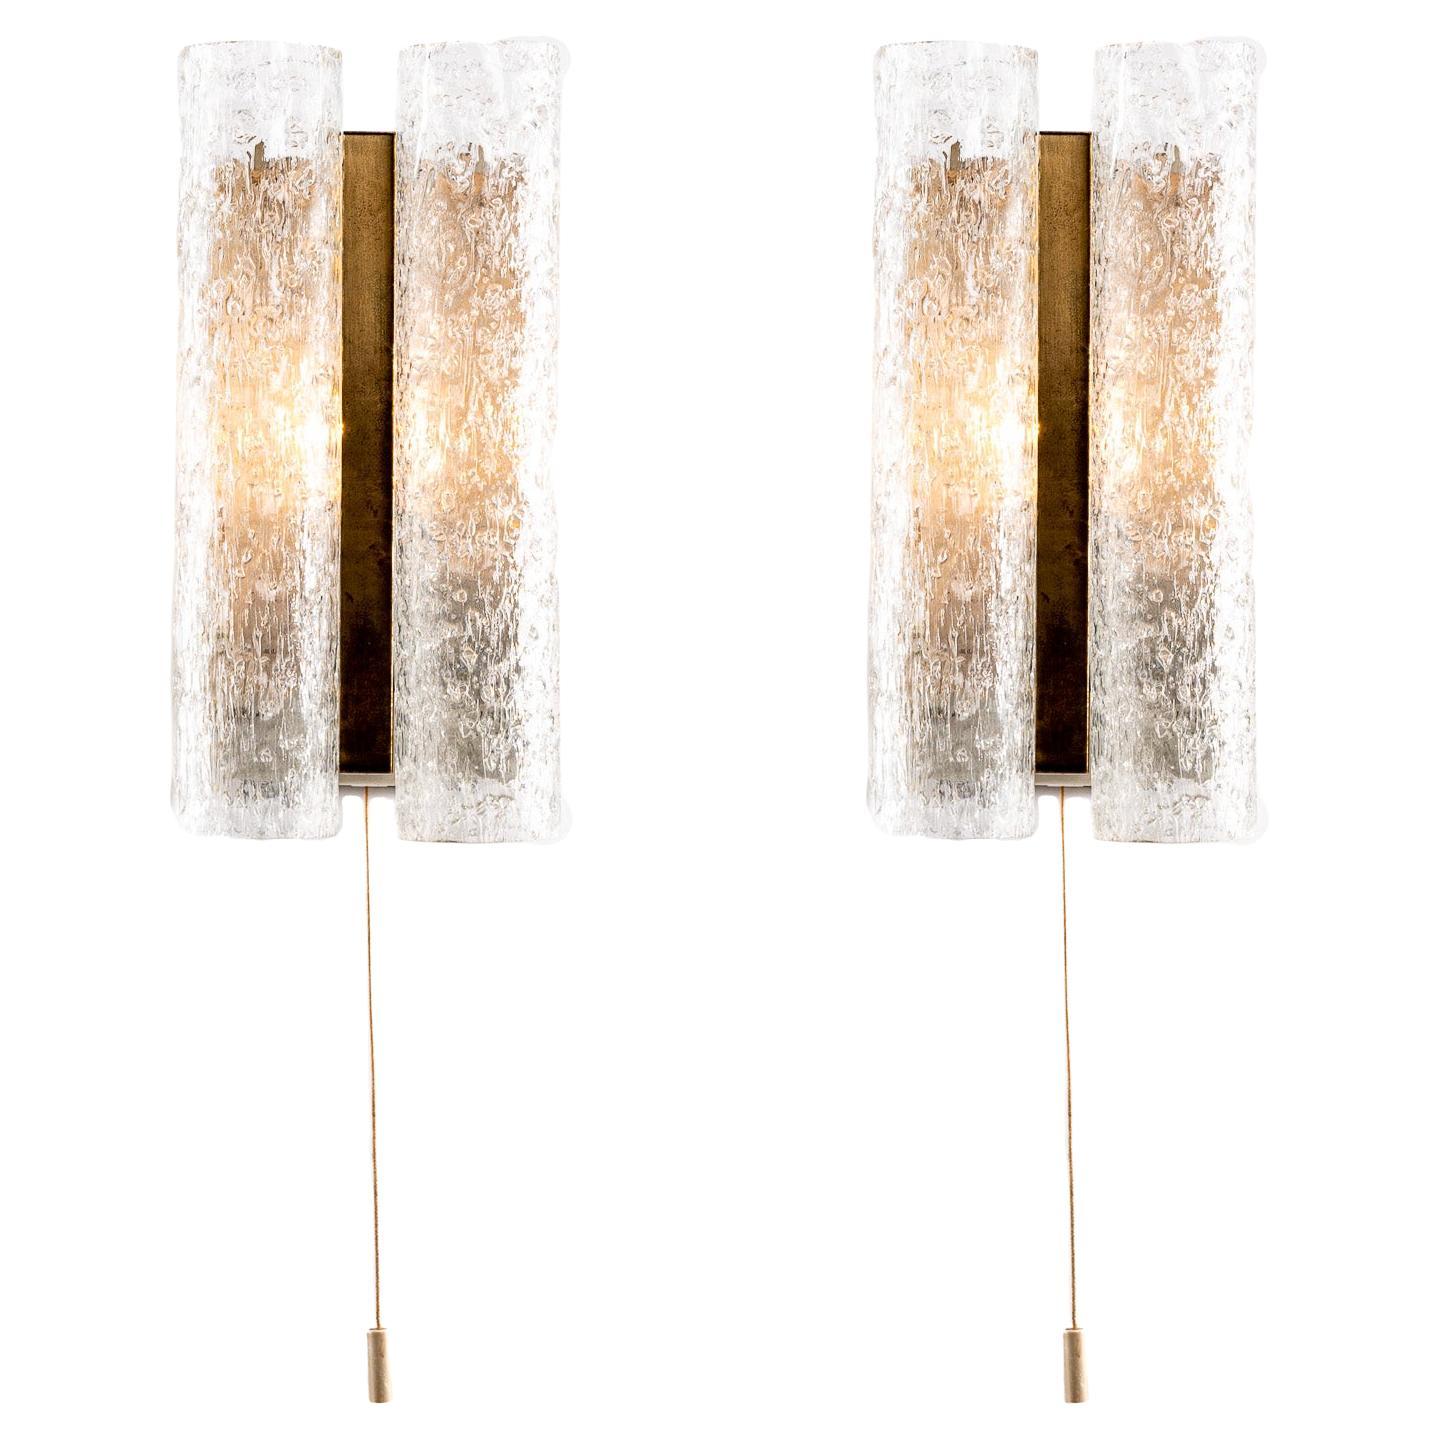 1960's Brass, Metal & Glass Tubes Sconces by Doria For Sale